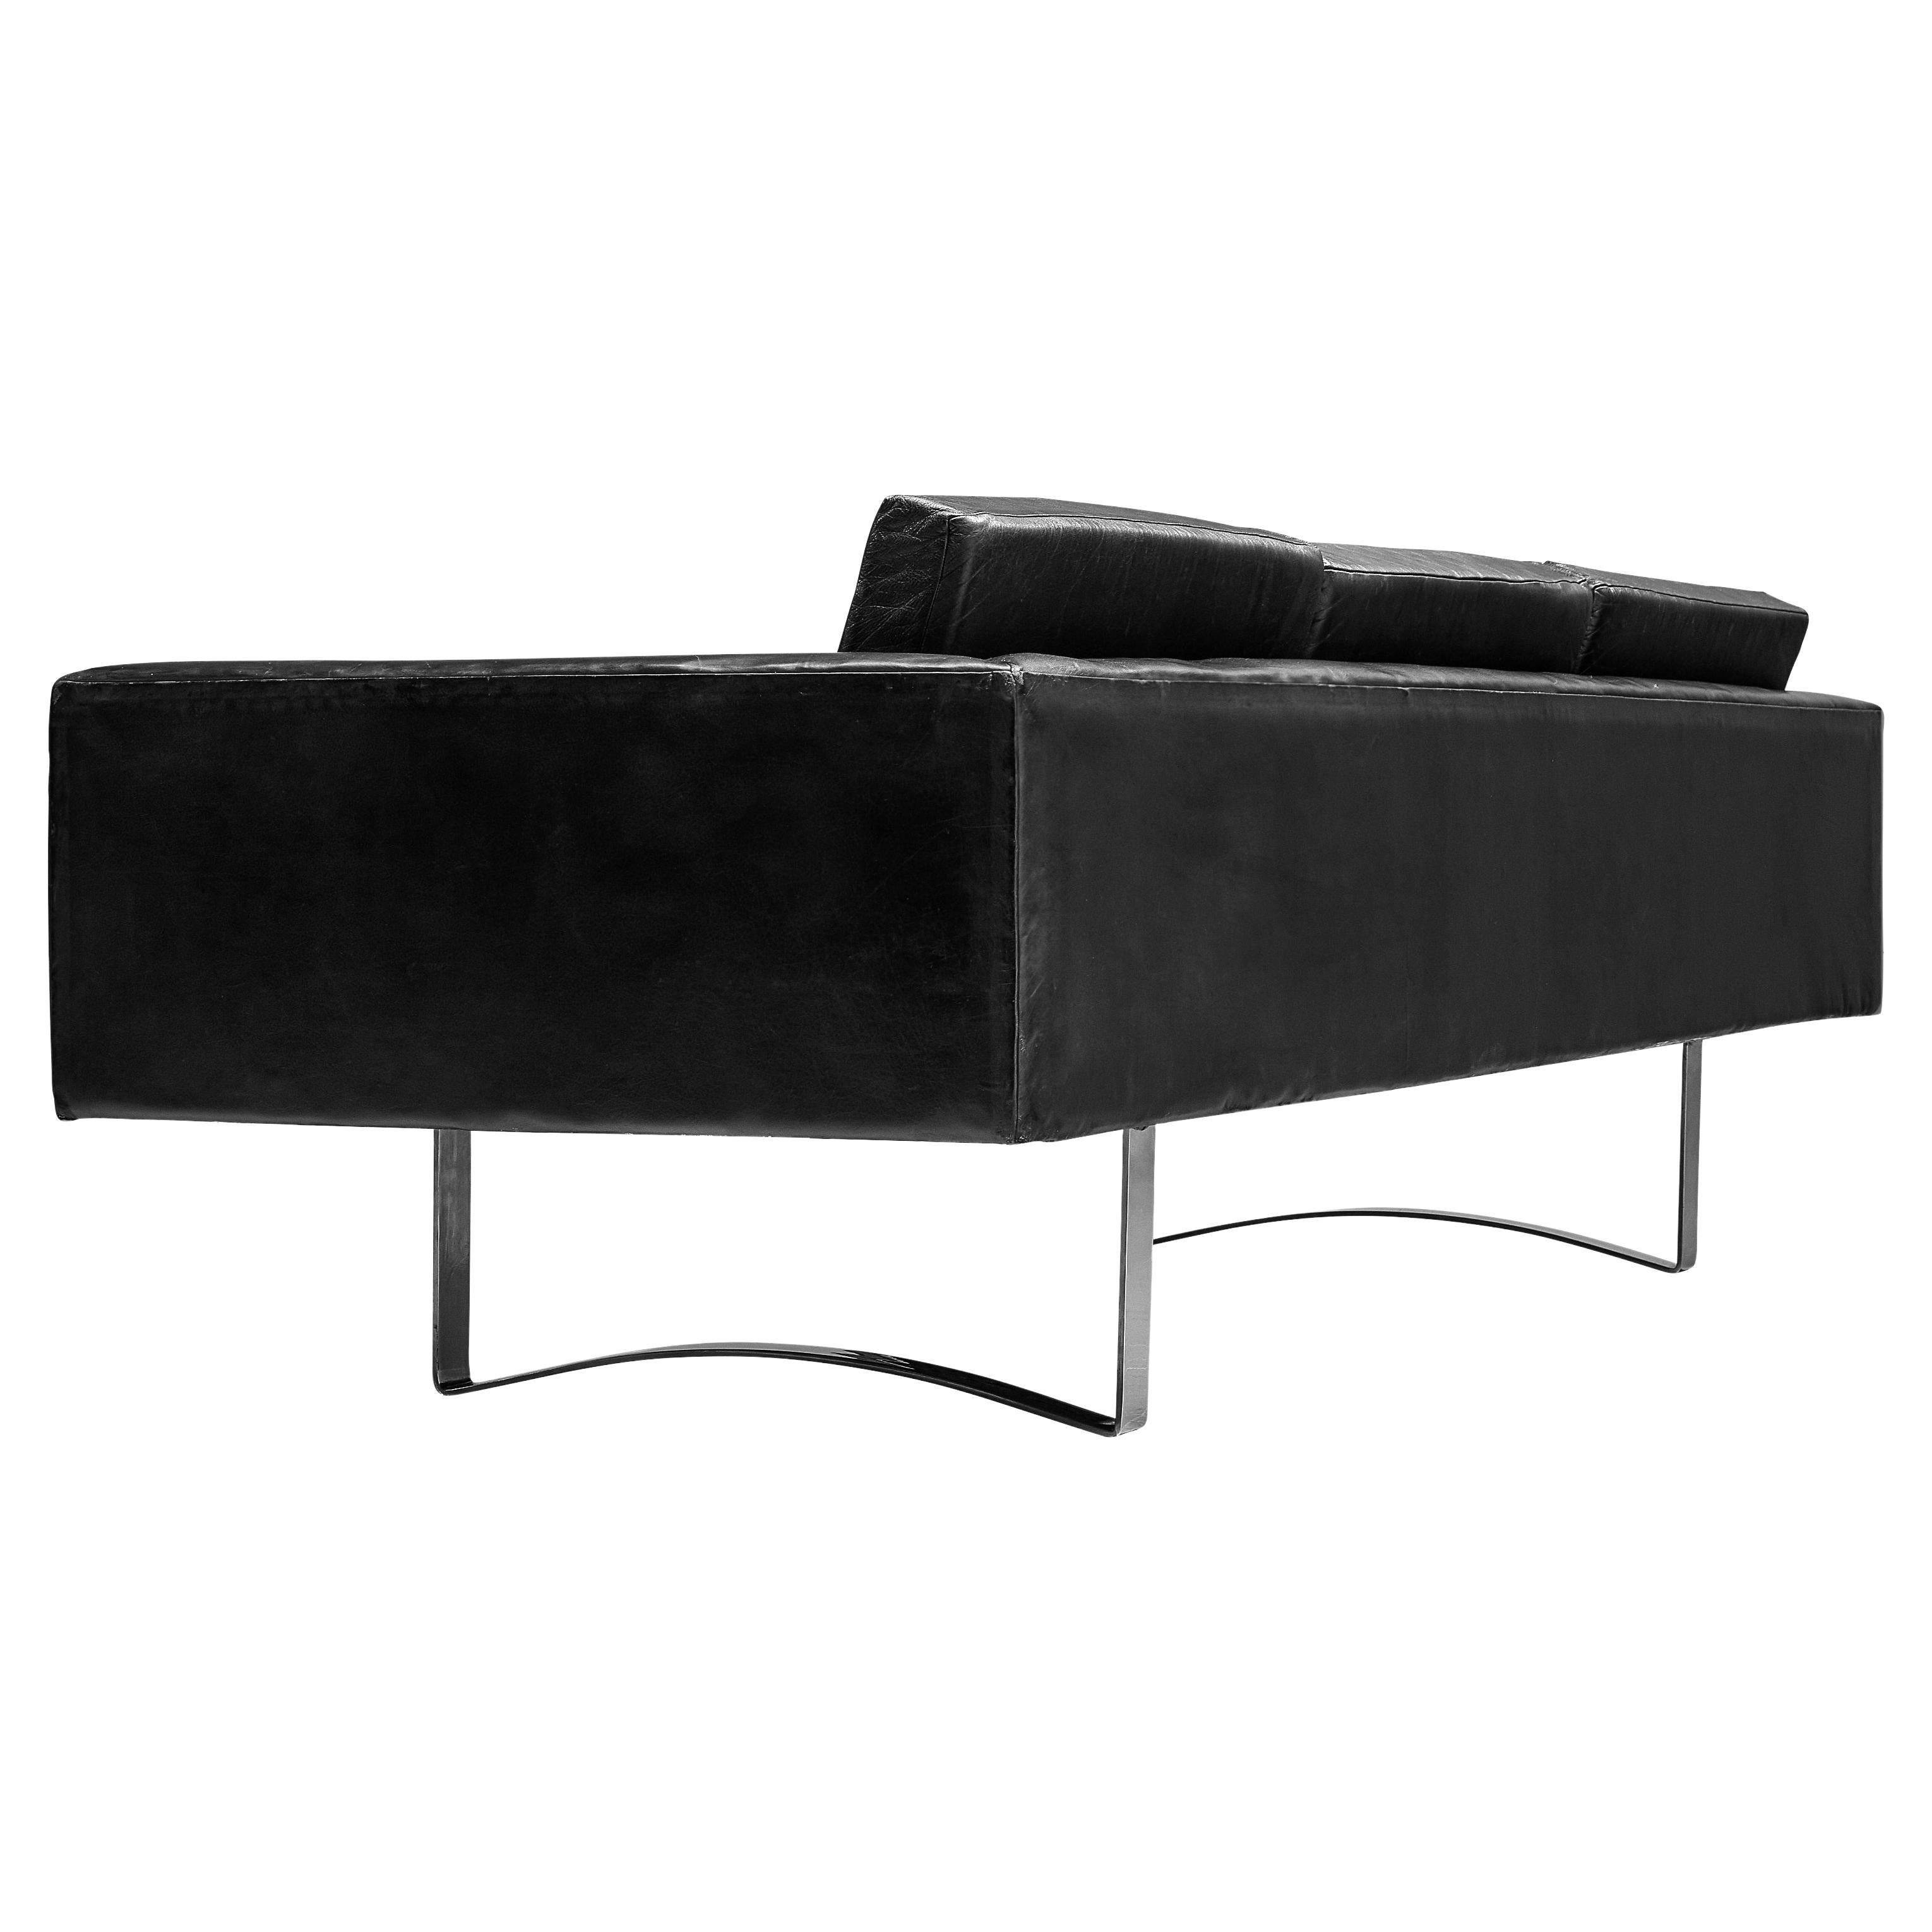 Bodil Kjaer Sofa in Black Leather and Steel For Sale